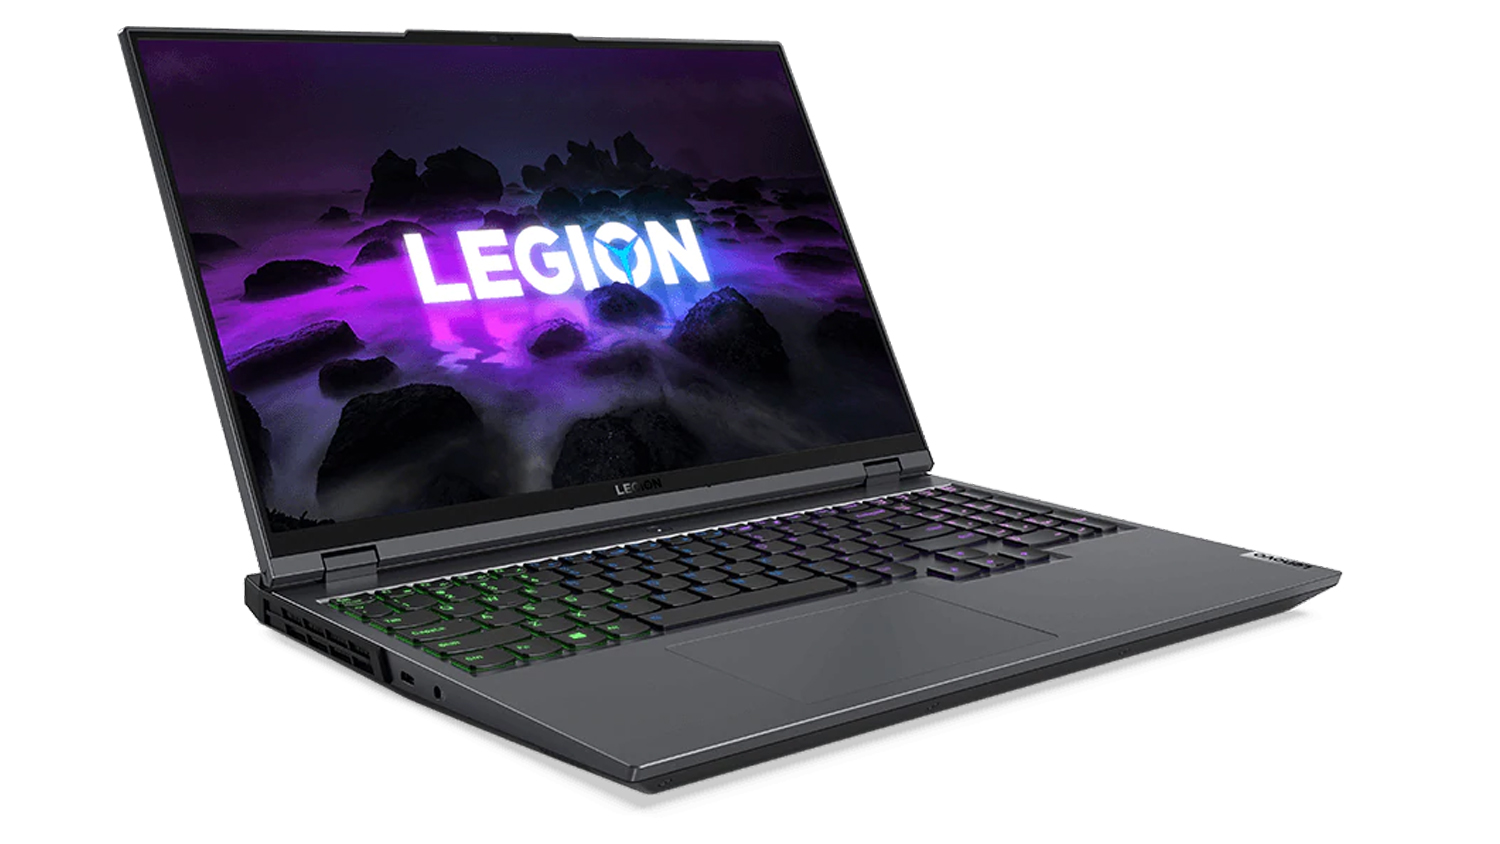 The Lenovo Legion 5 Pro is a near perfect gaming laptop